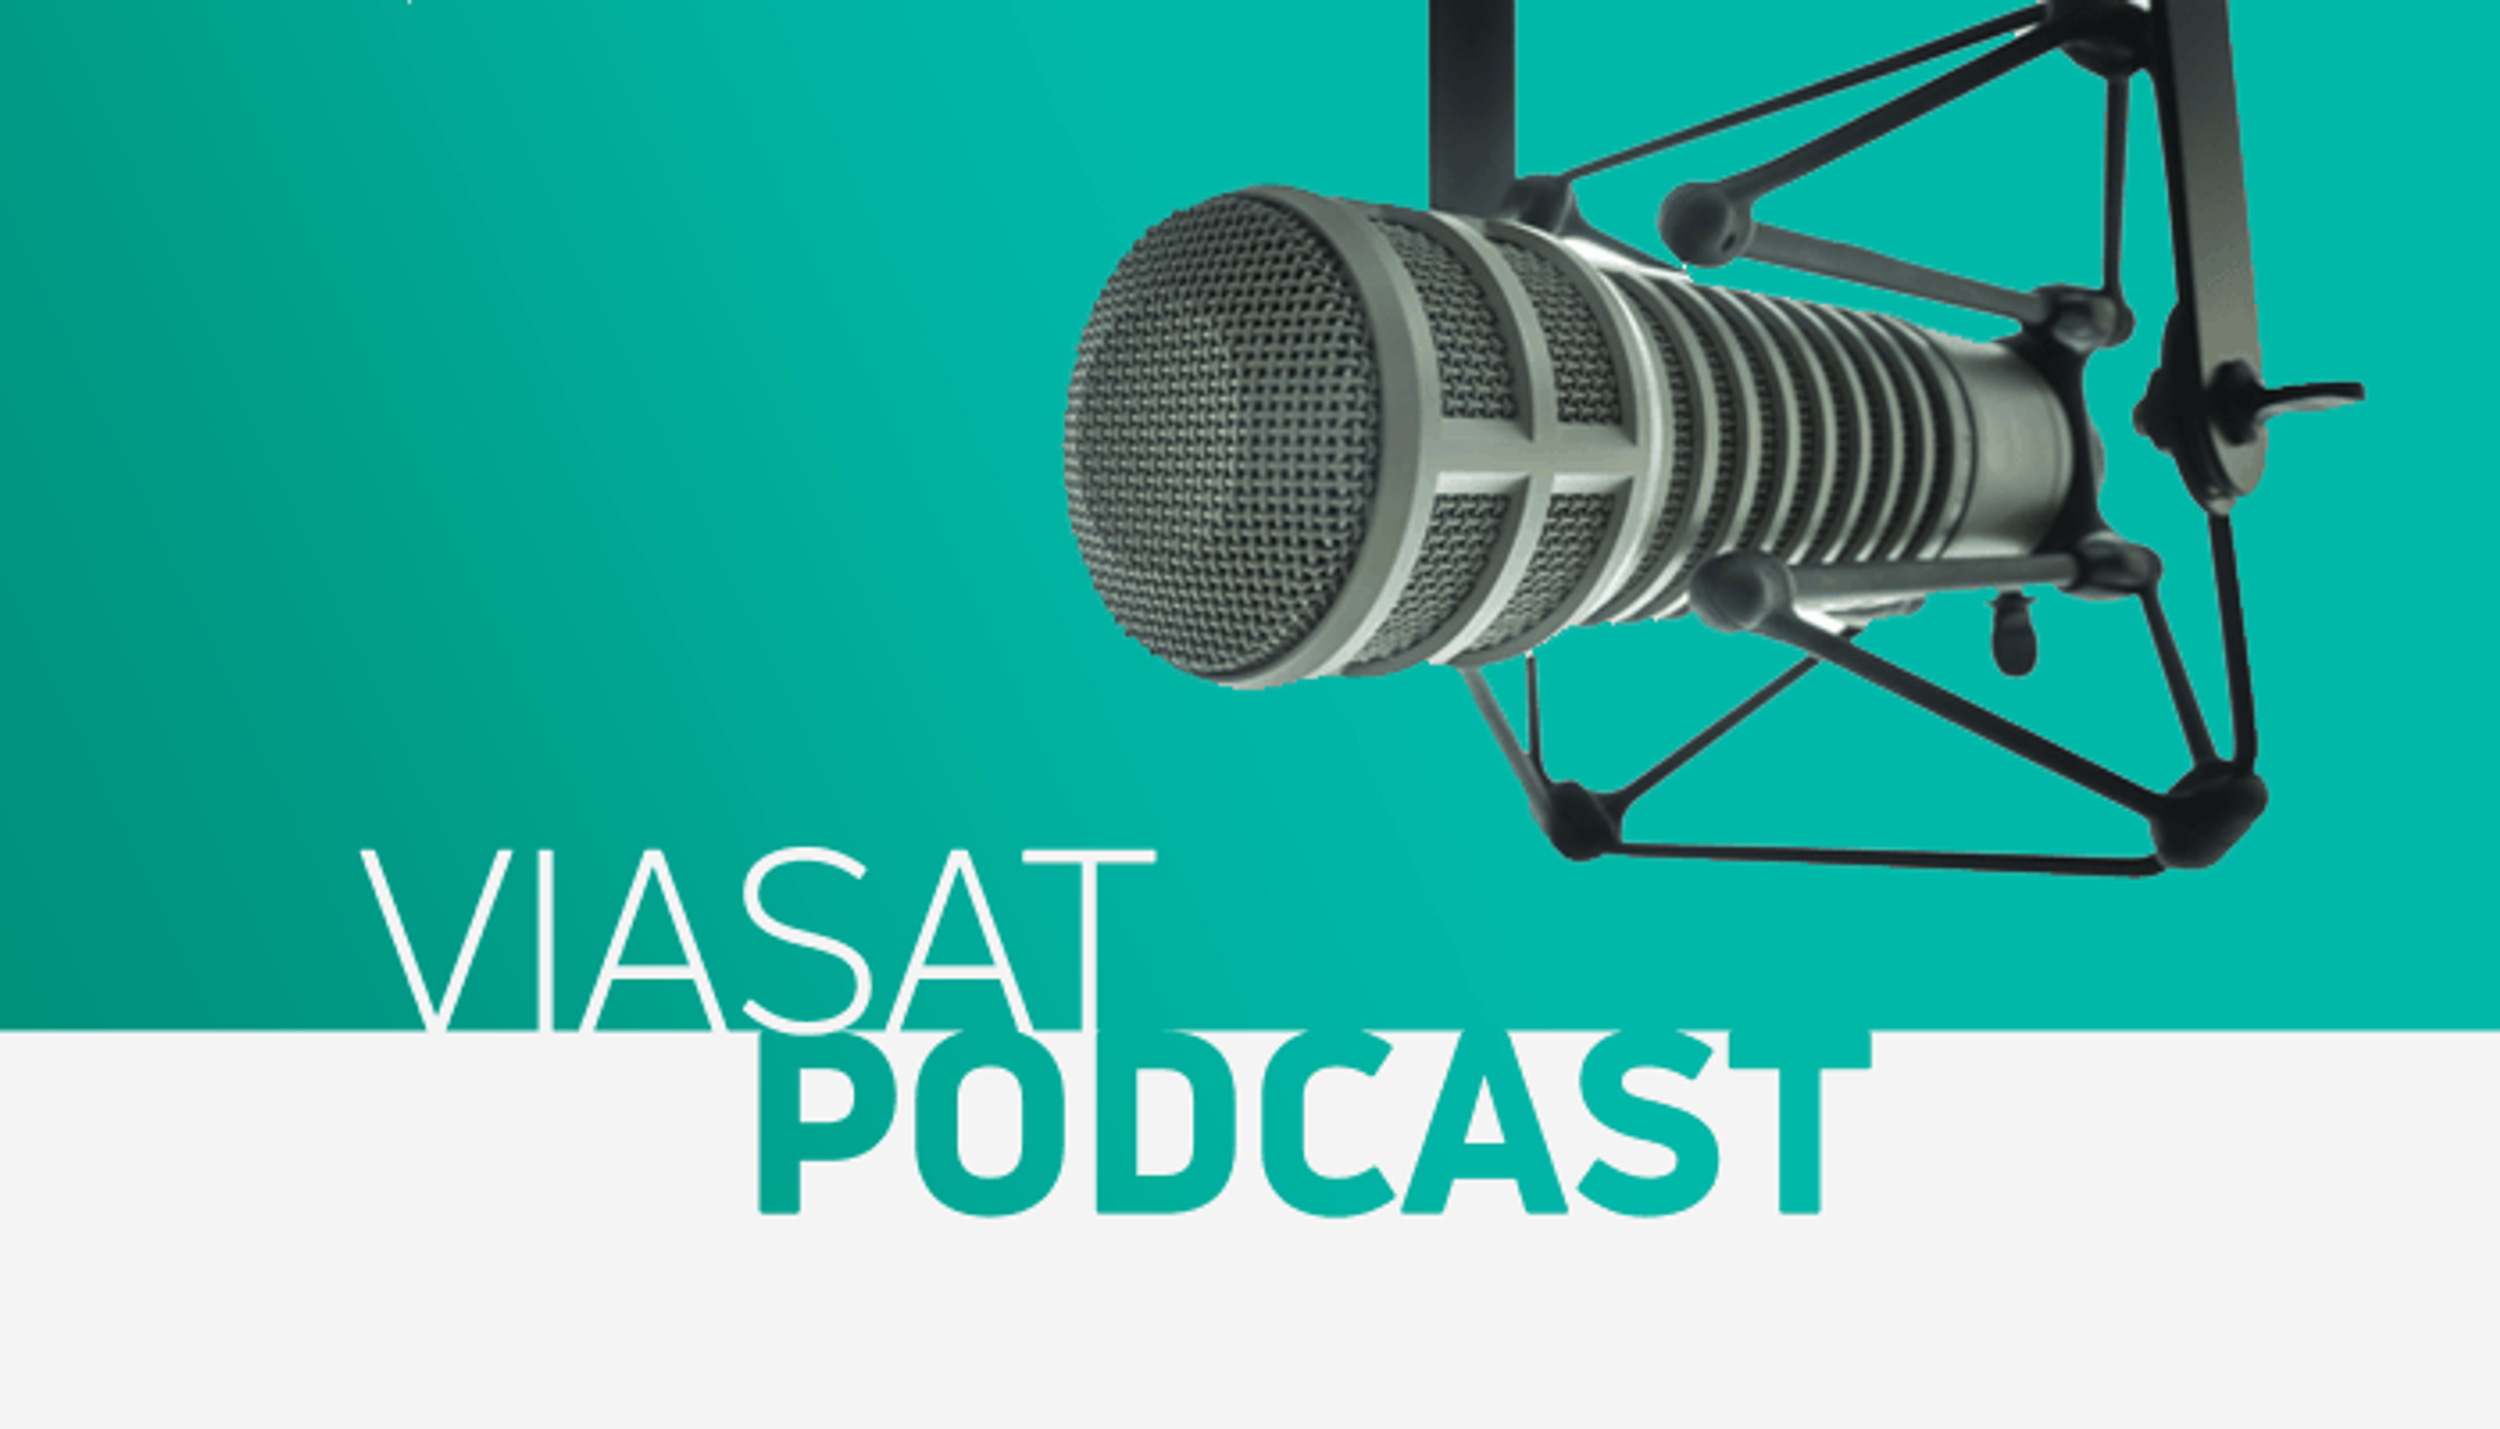 Podcast: Viasat’s Chief People Officer on what makes the company such an appealing workplace